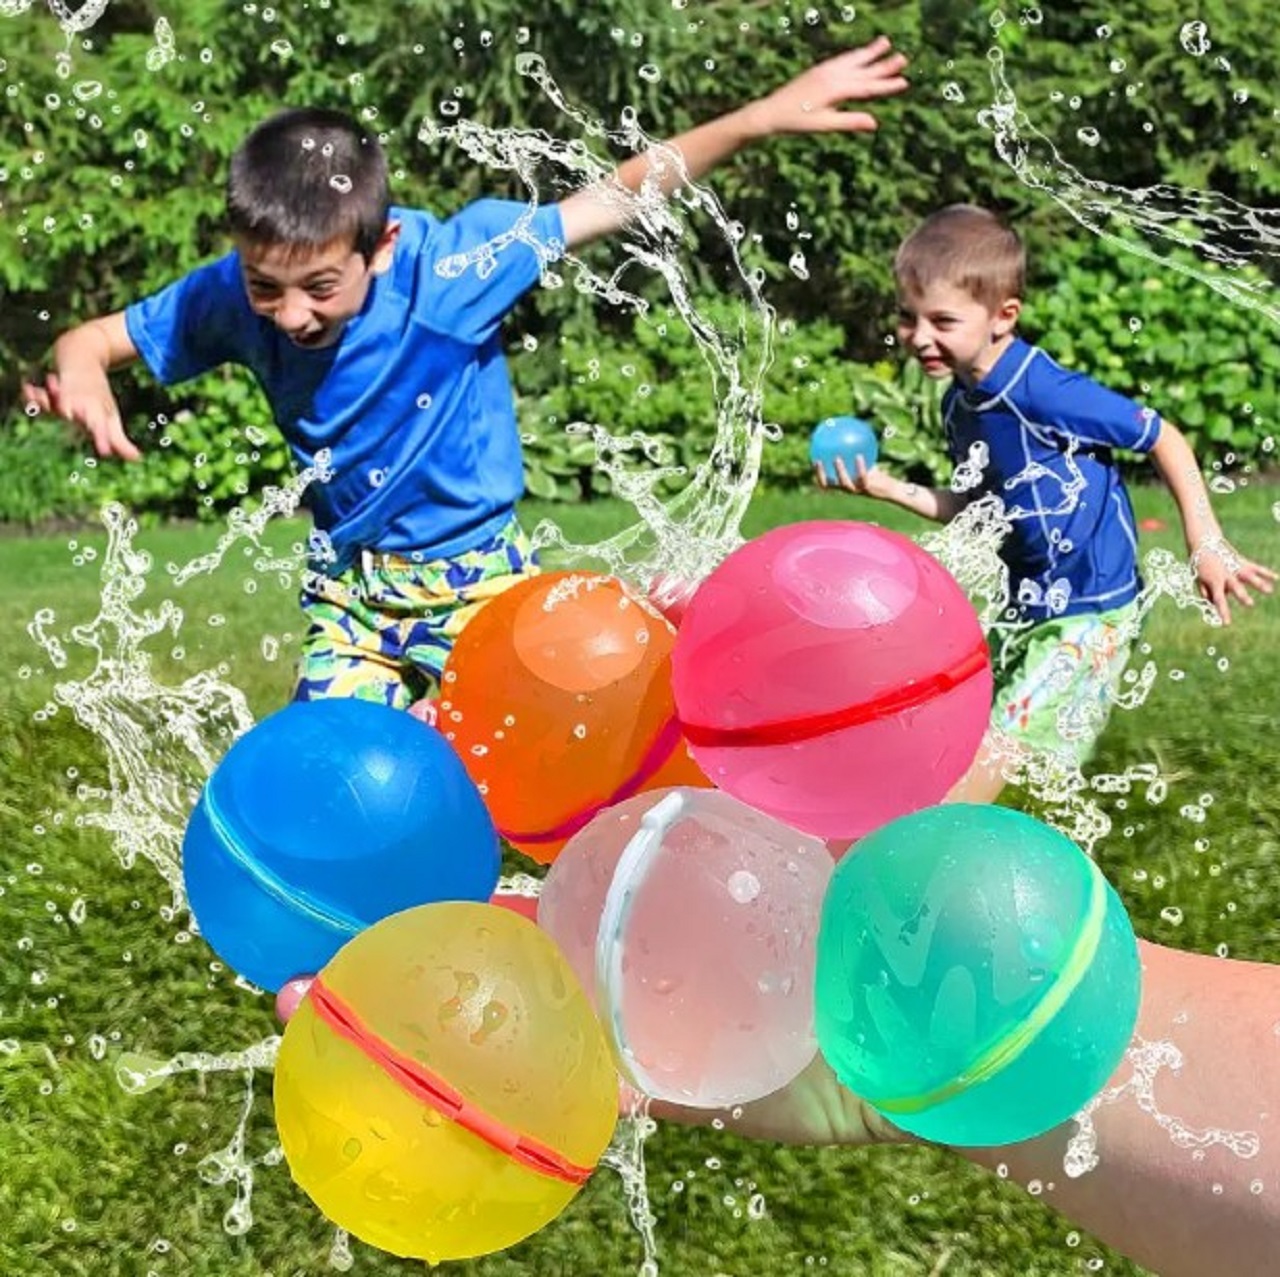 Hiliop’s Innovative Approach to Water Balloons